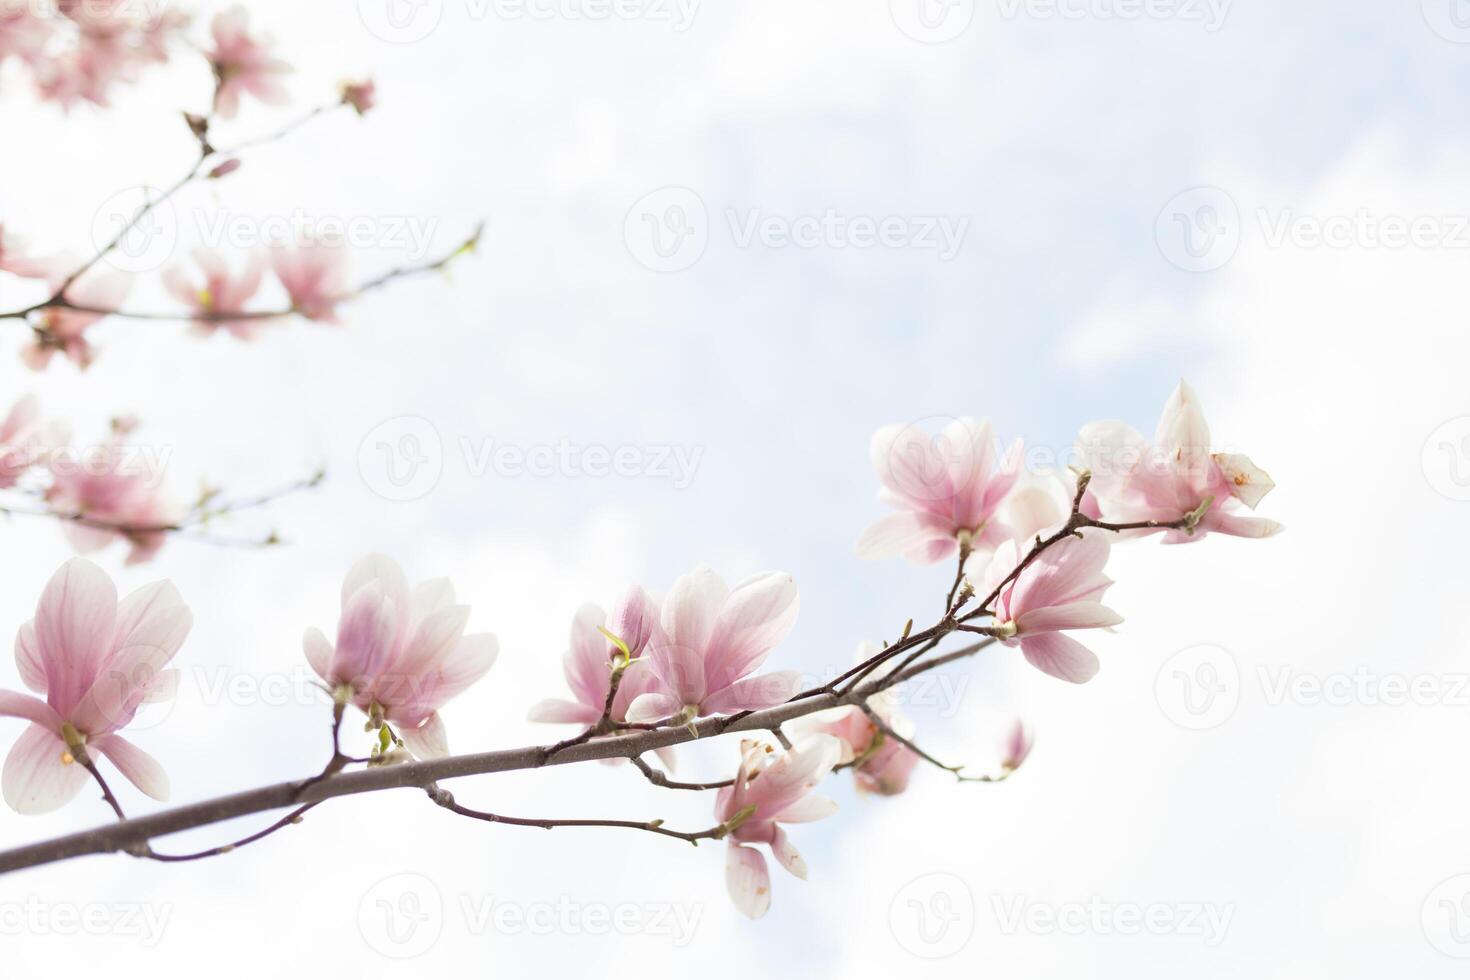 Closeup of magnolia tree blossom with blurred background and warm sunshine photo